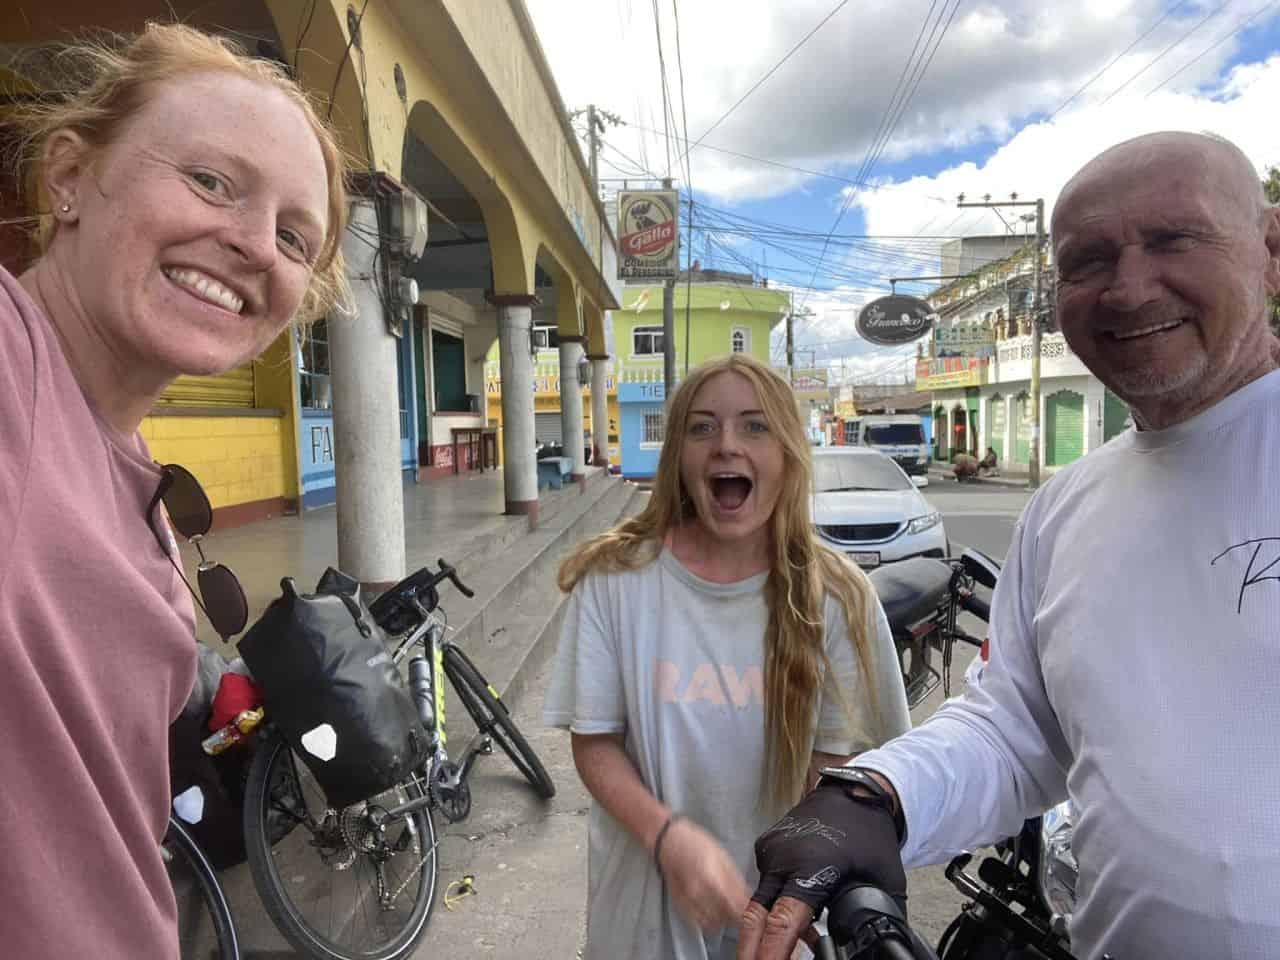 Robert meets up with two young women from London, UK. They are bikepacking to Panama.